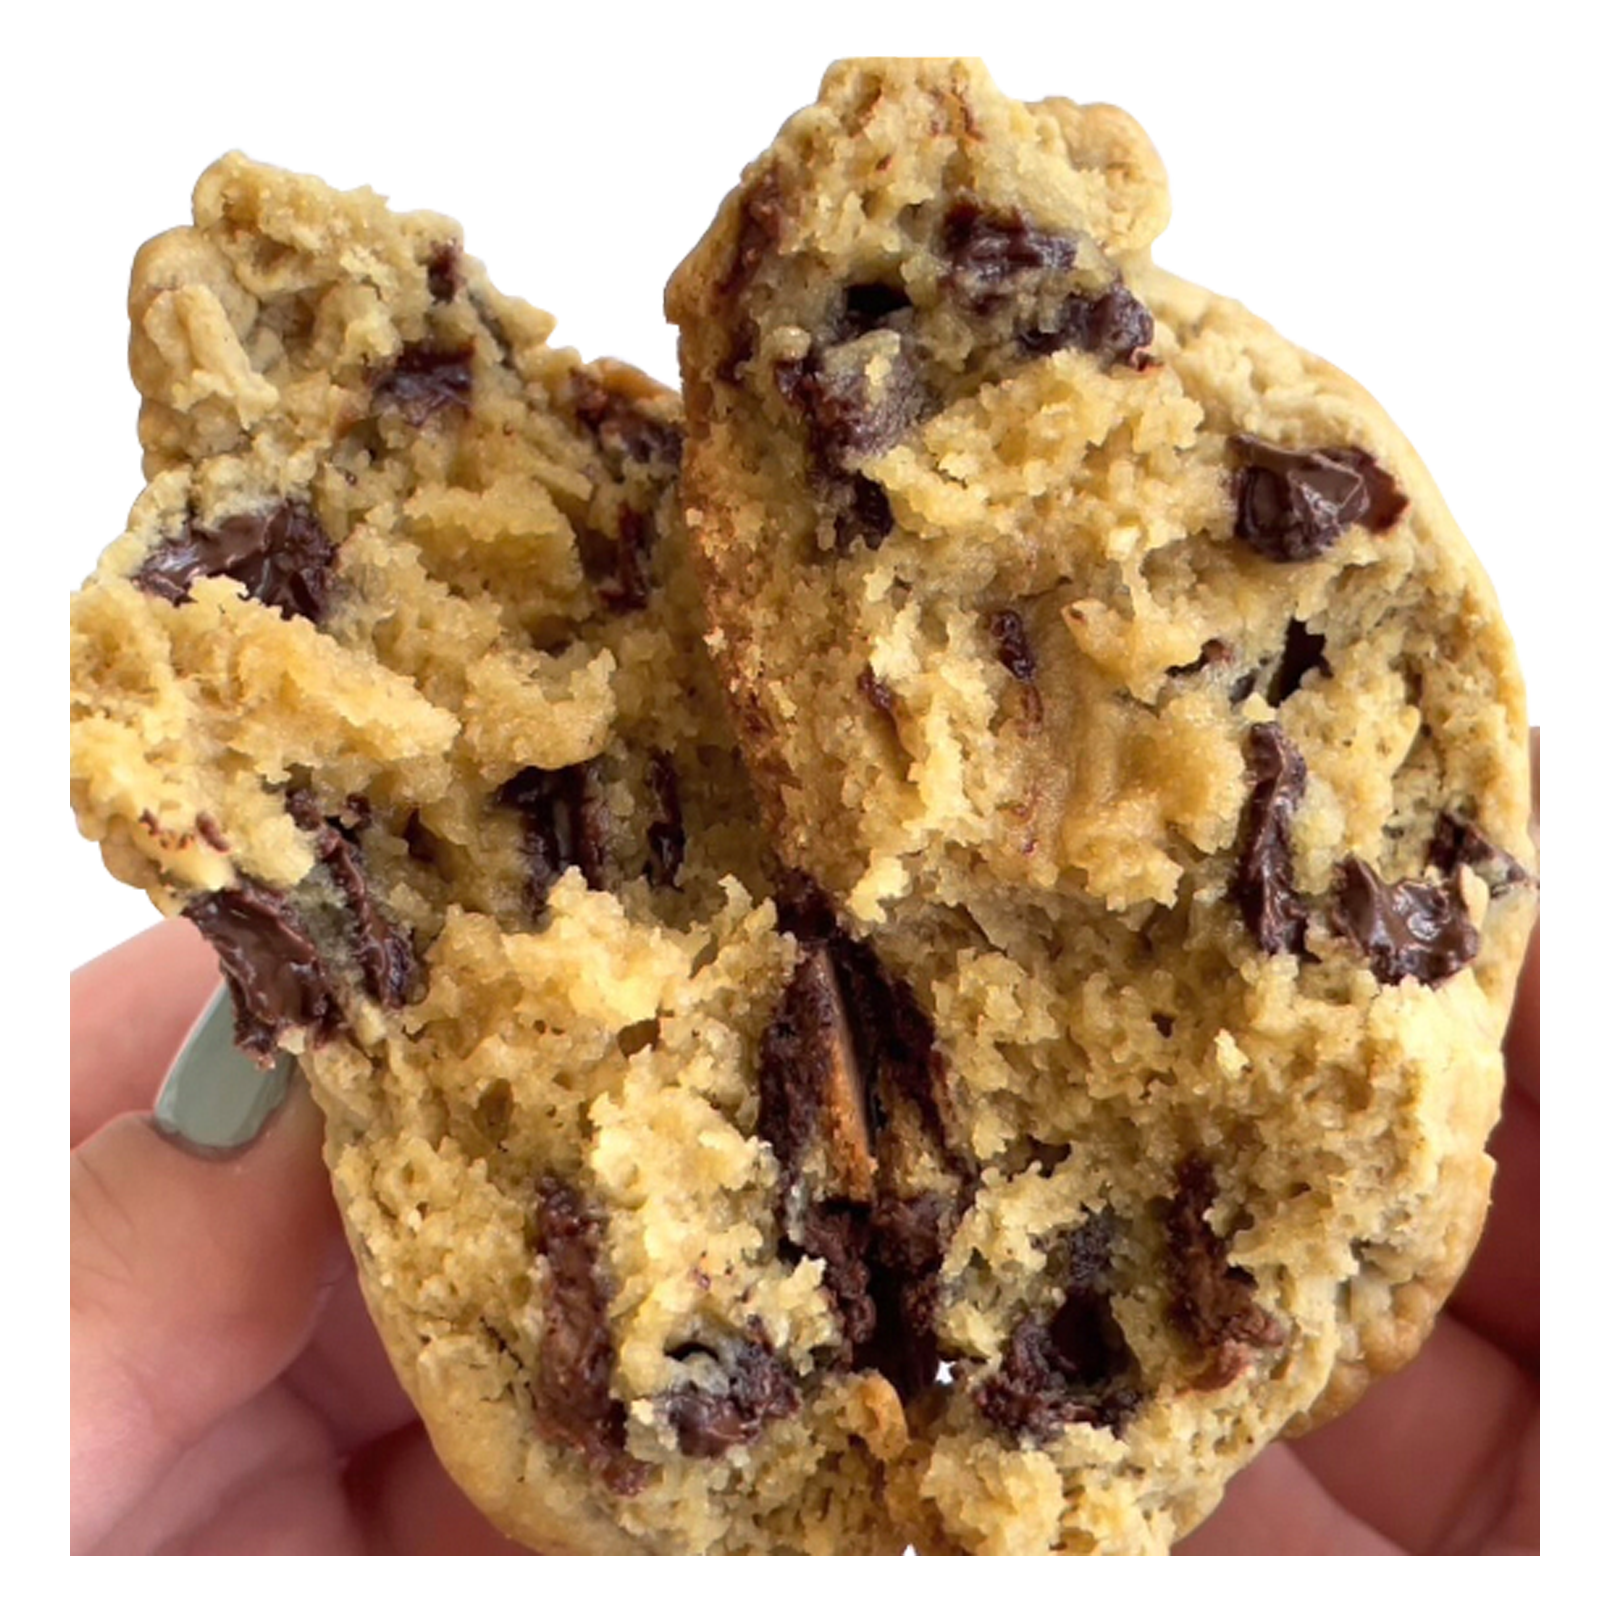 Gooey on the Inside Chocolate Chip Chunk Cookie Bites 4-Pack